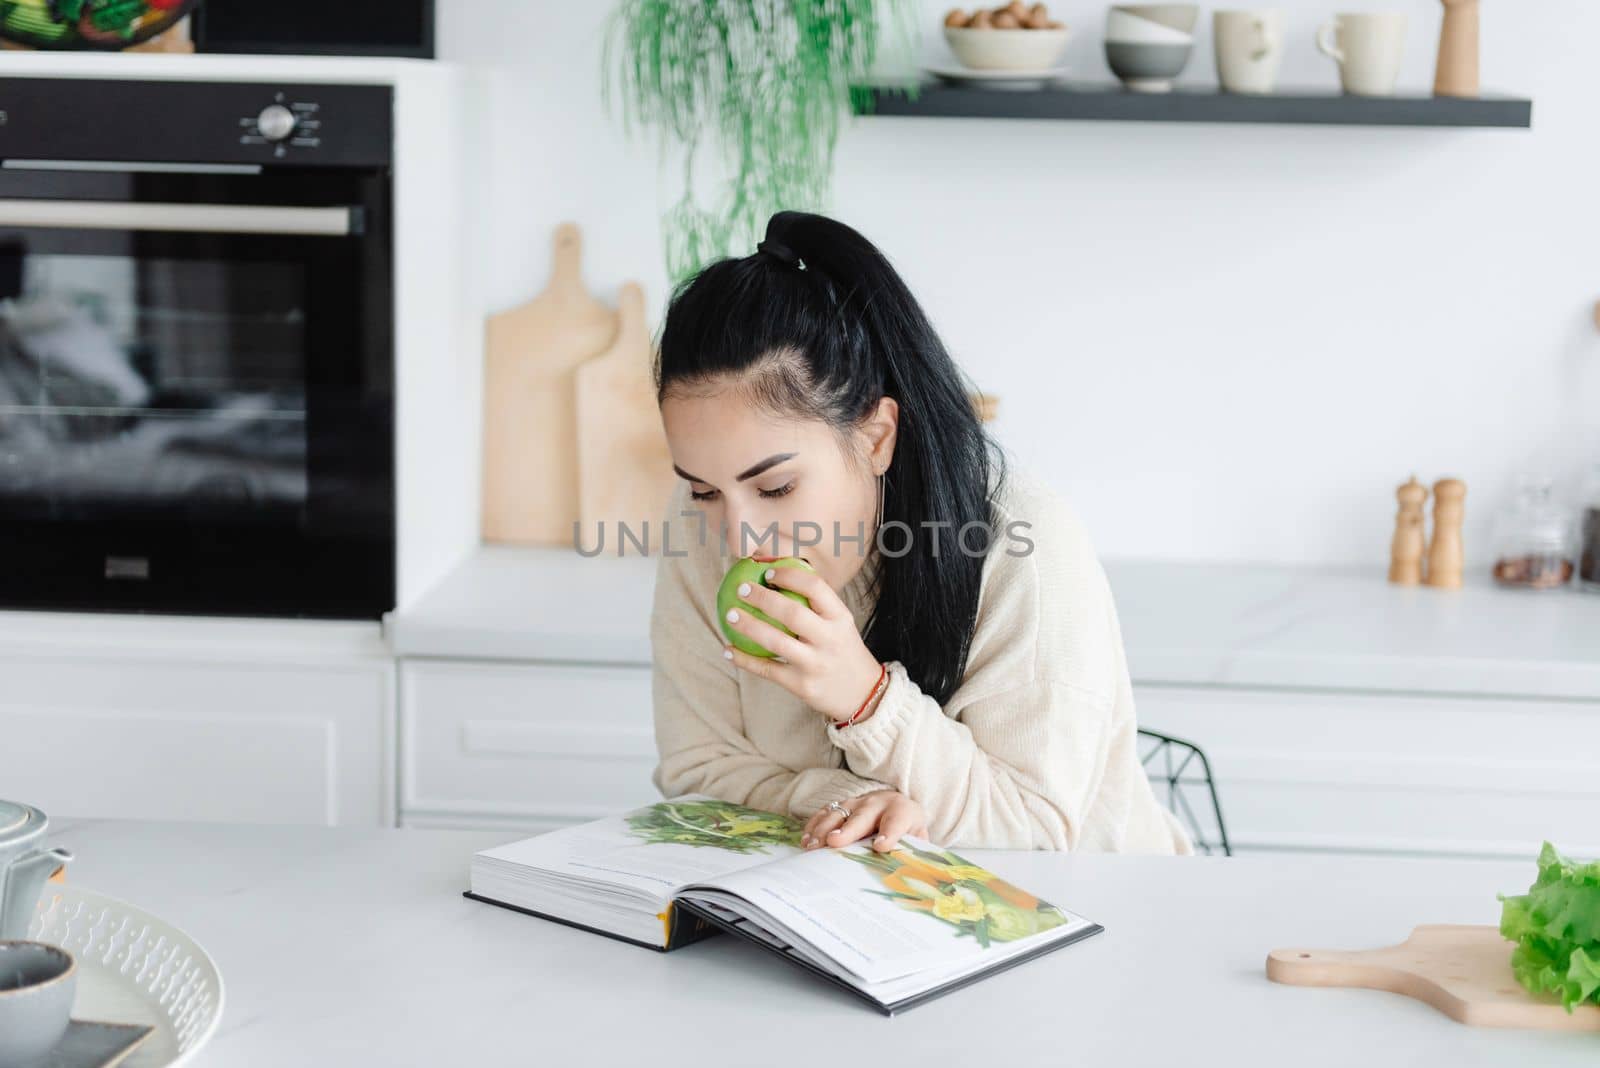 Healthy Eating. A young woman eats a lot of greens. Self-care. Woman reading a magazine about diet and healthy eating.